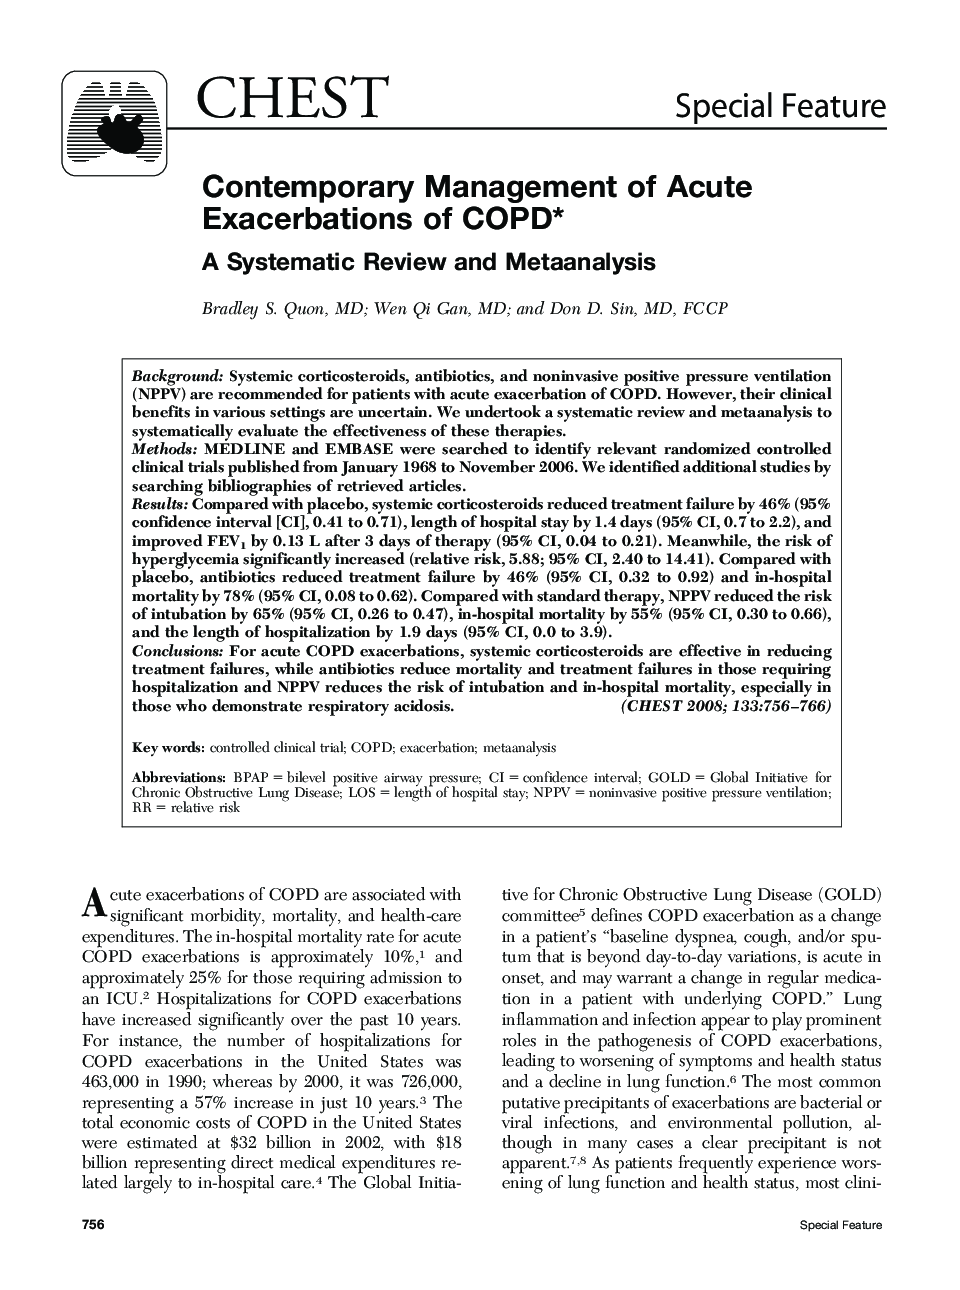 Contemporary Management of Acute Exacerbations of COPD : A Systematic Review and Metaanalysis